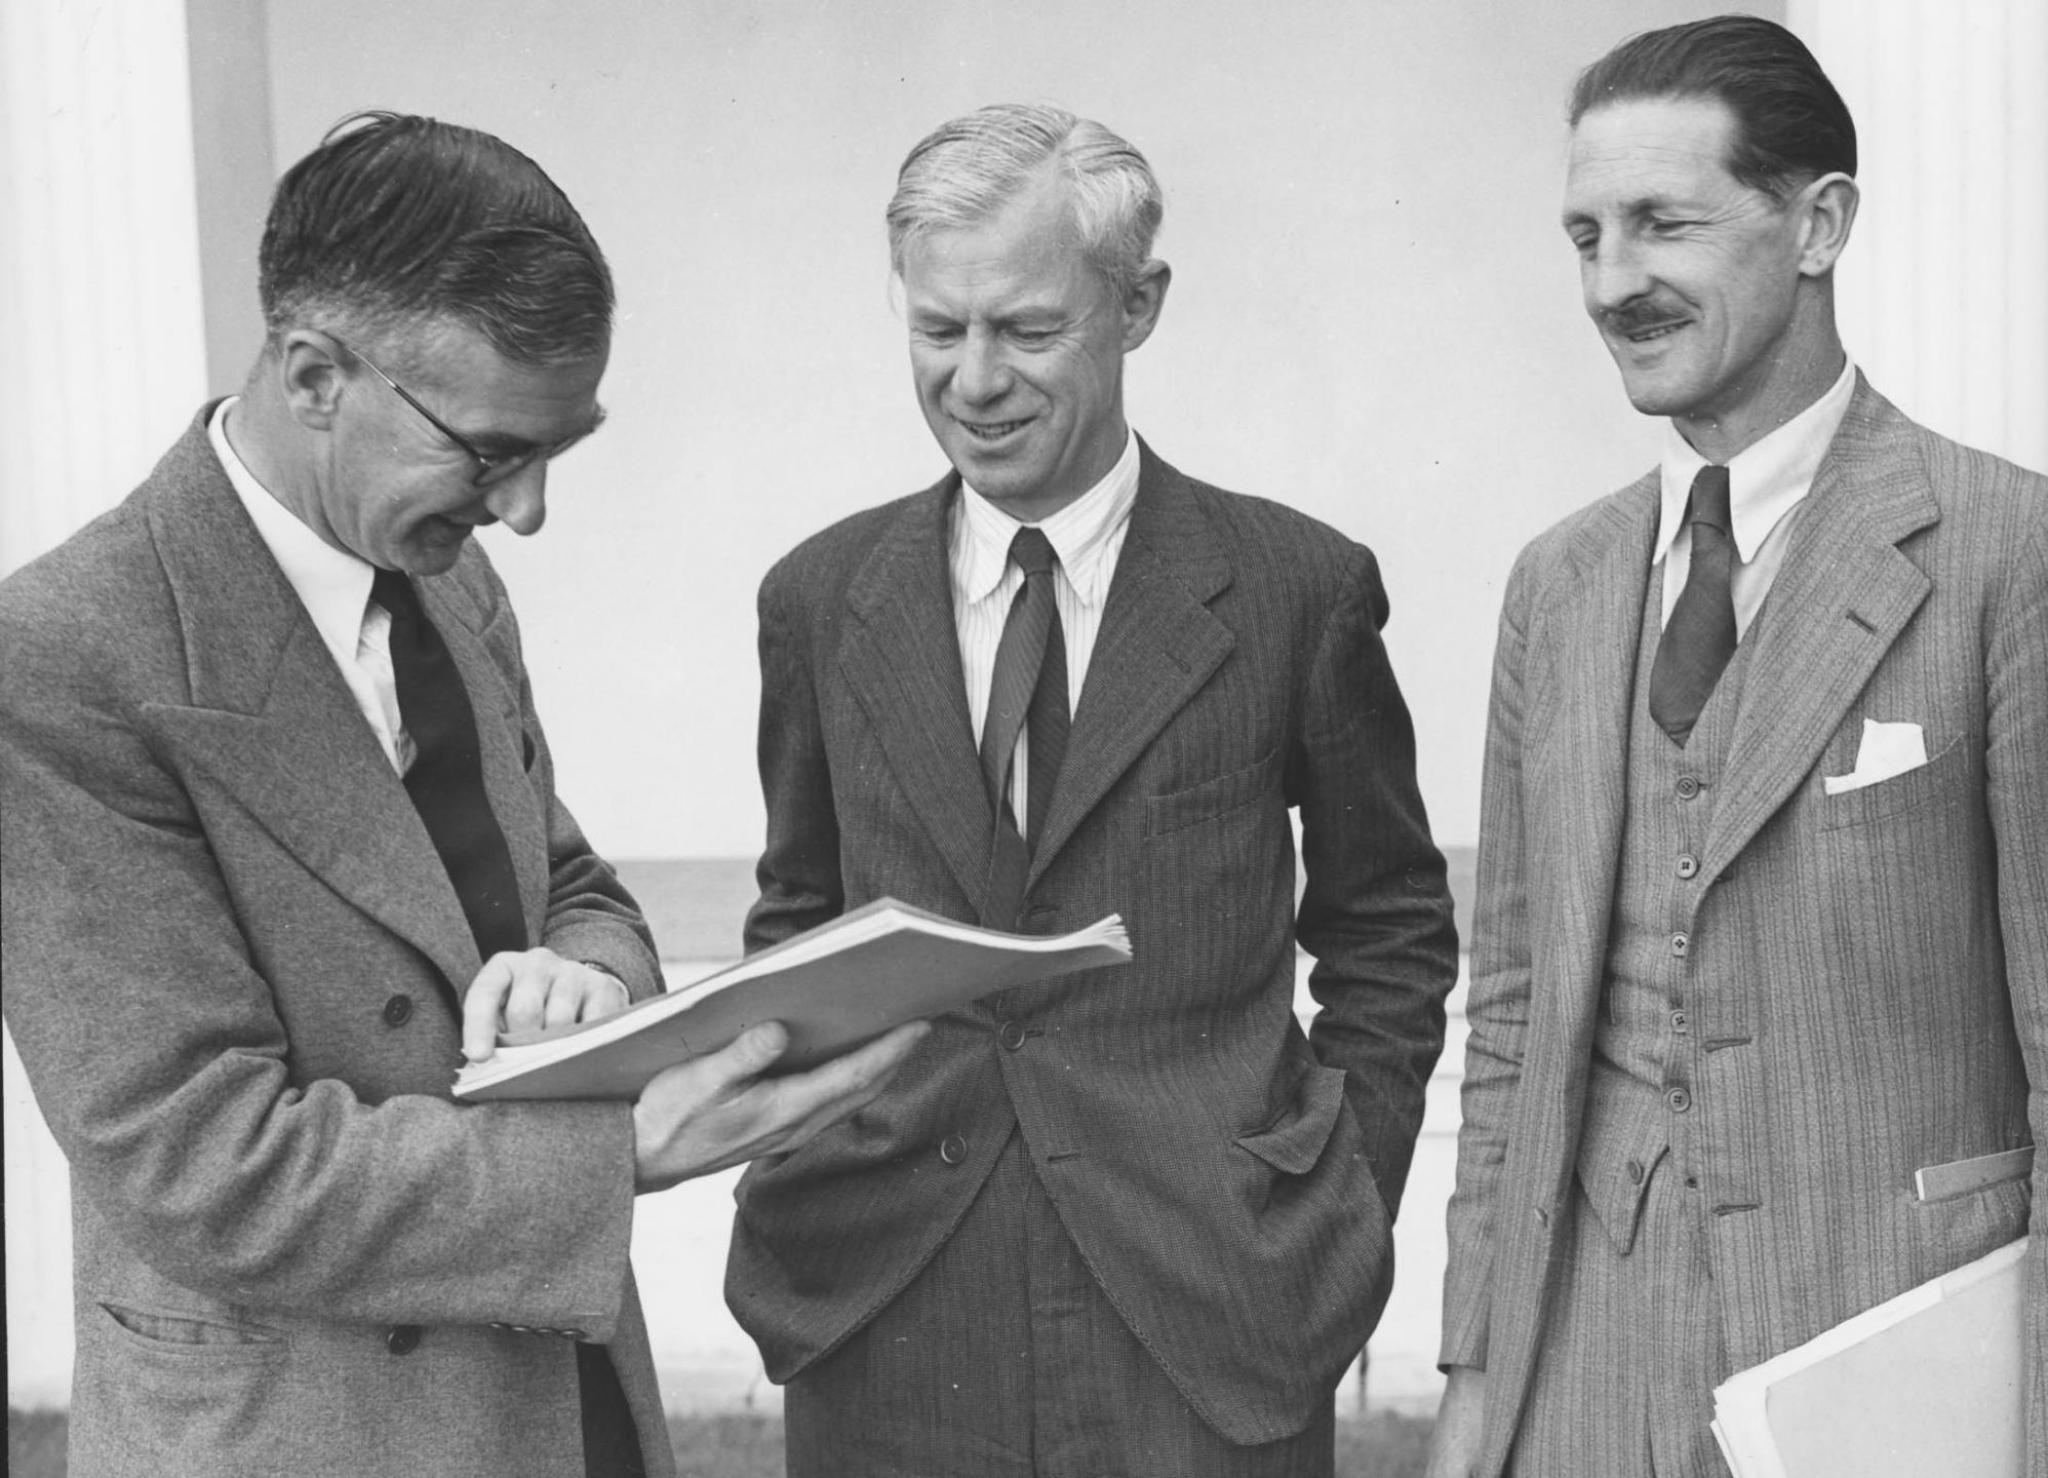 ANU Registrar RG Osborne speaking with members of the ANU Academic Advisory Council, Sir Keith Hancocl and Professor Raymond firth dueing the Easter Conference, 1948 (ANUA15-1)